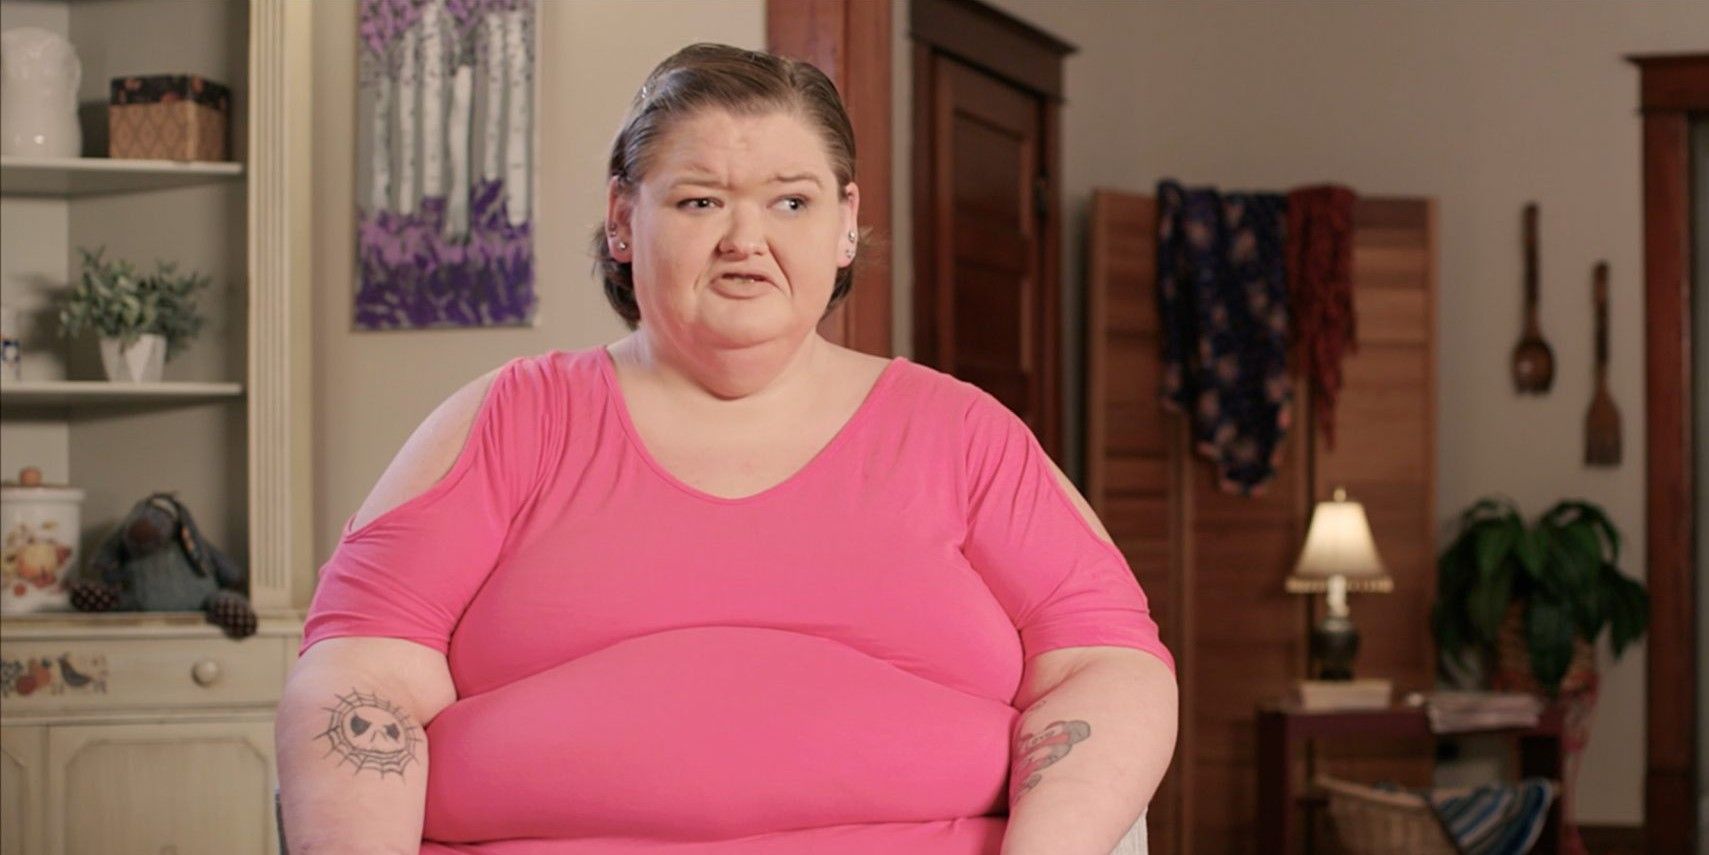 1000-Lb Sisters: What Dr. Proctor’s Saying About Amy Slaton’s Weight